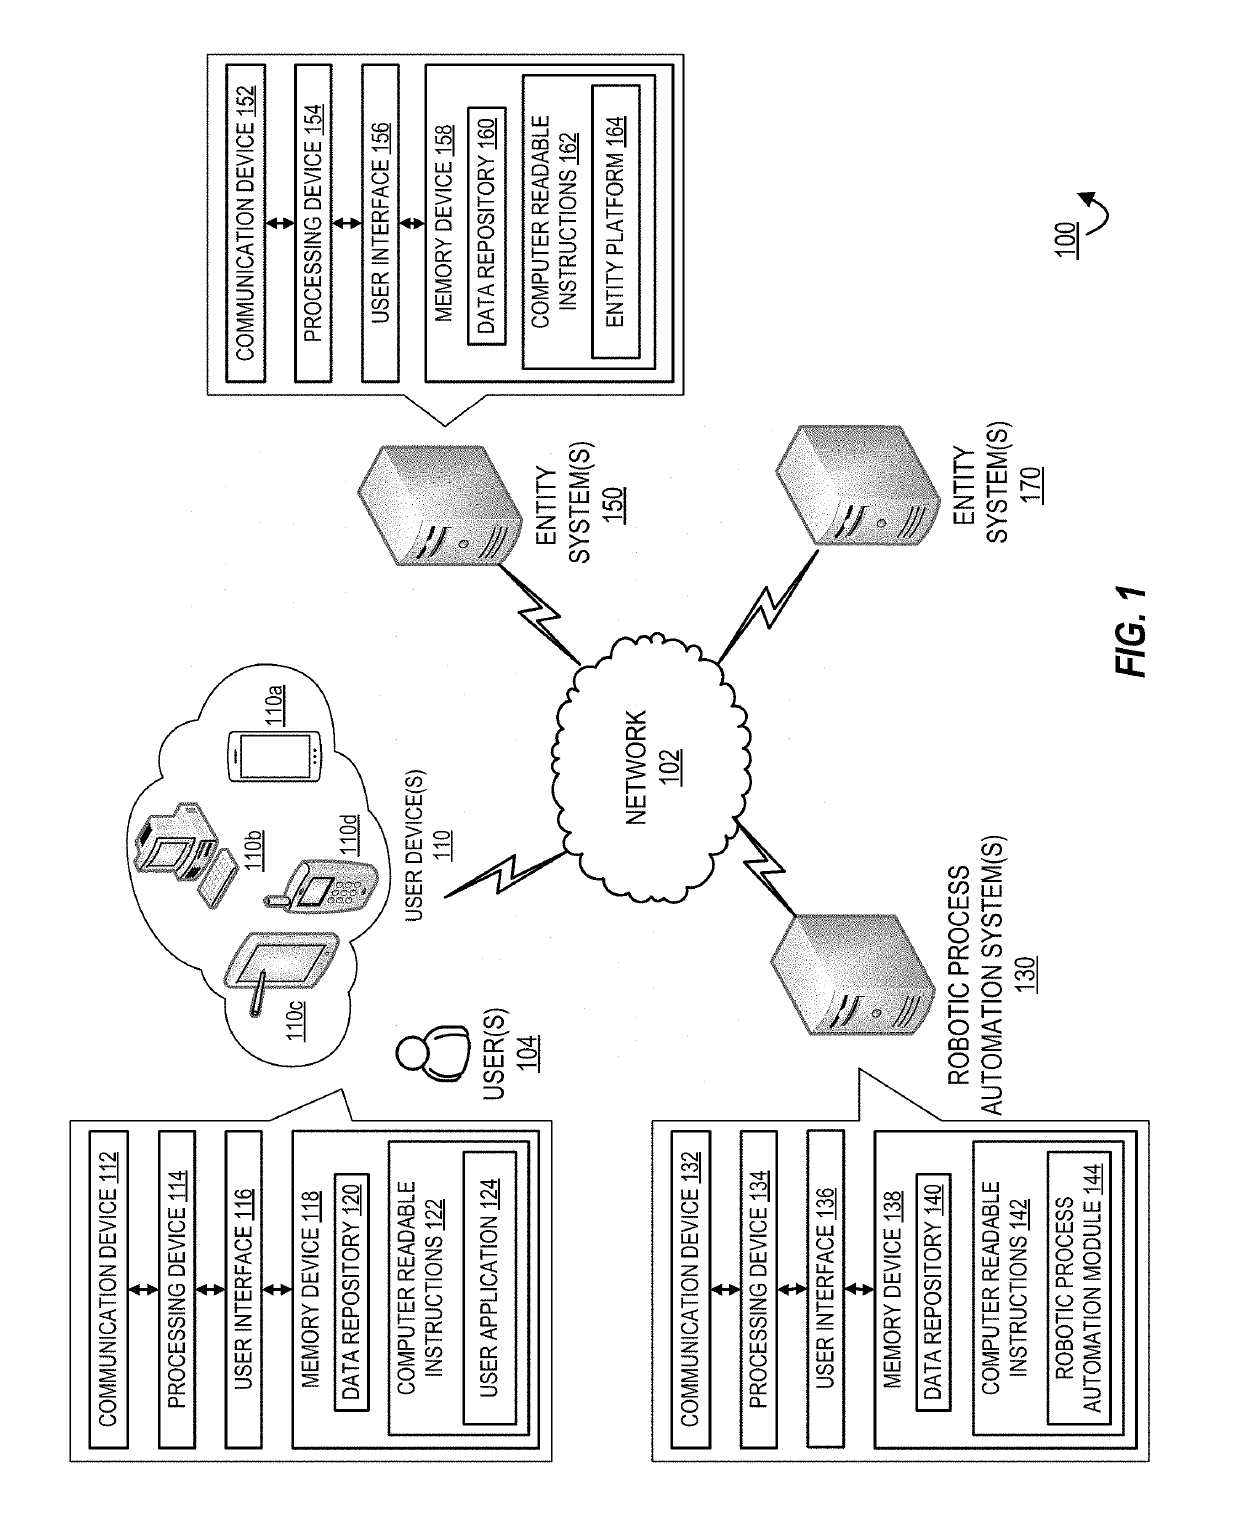 System for connection channel adaption using robotic automation